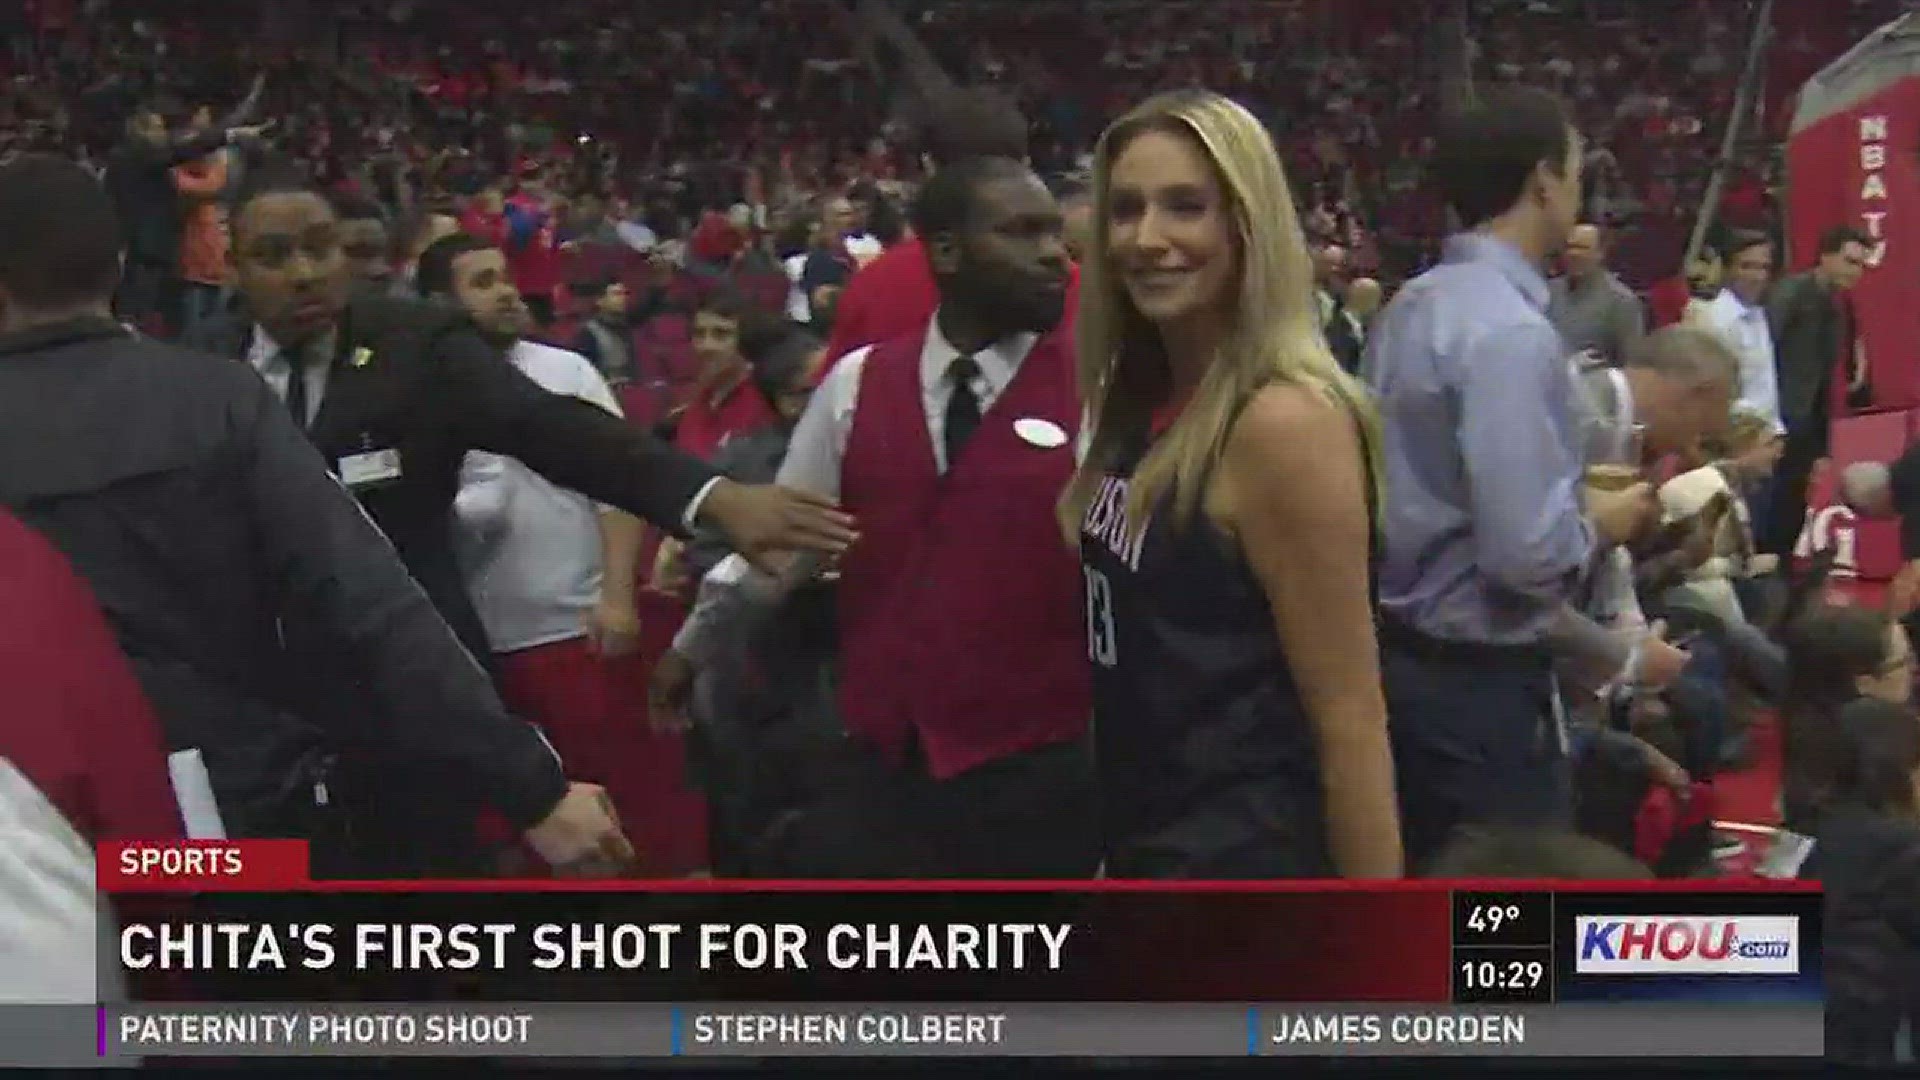 KHOU 11's very own Meteorologist Chita Craft shot hoops for charity at the Rockets game Wednesday night.